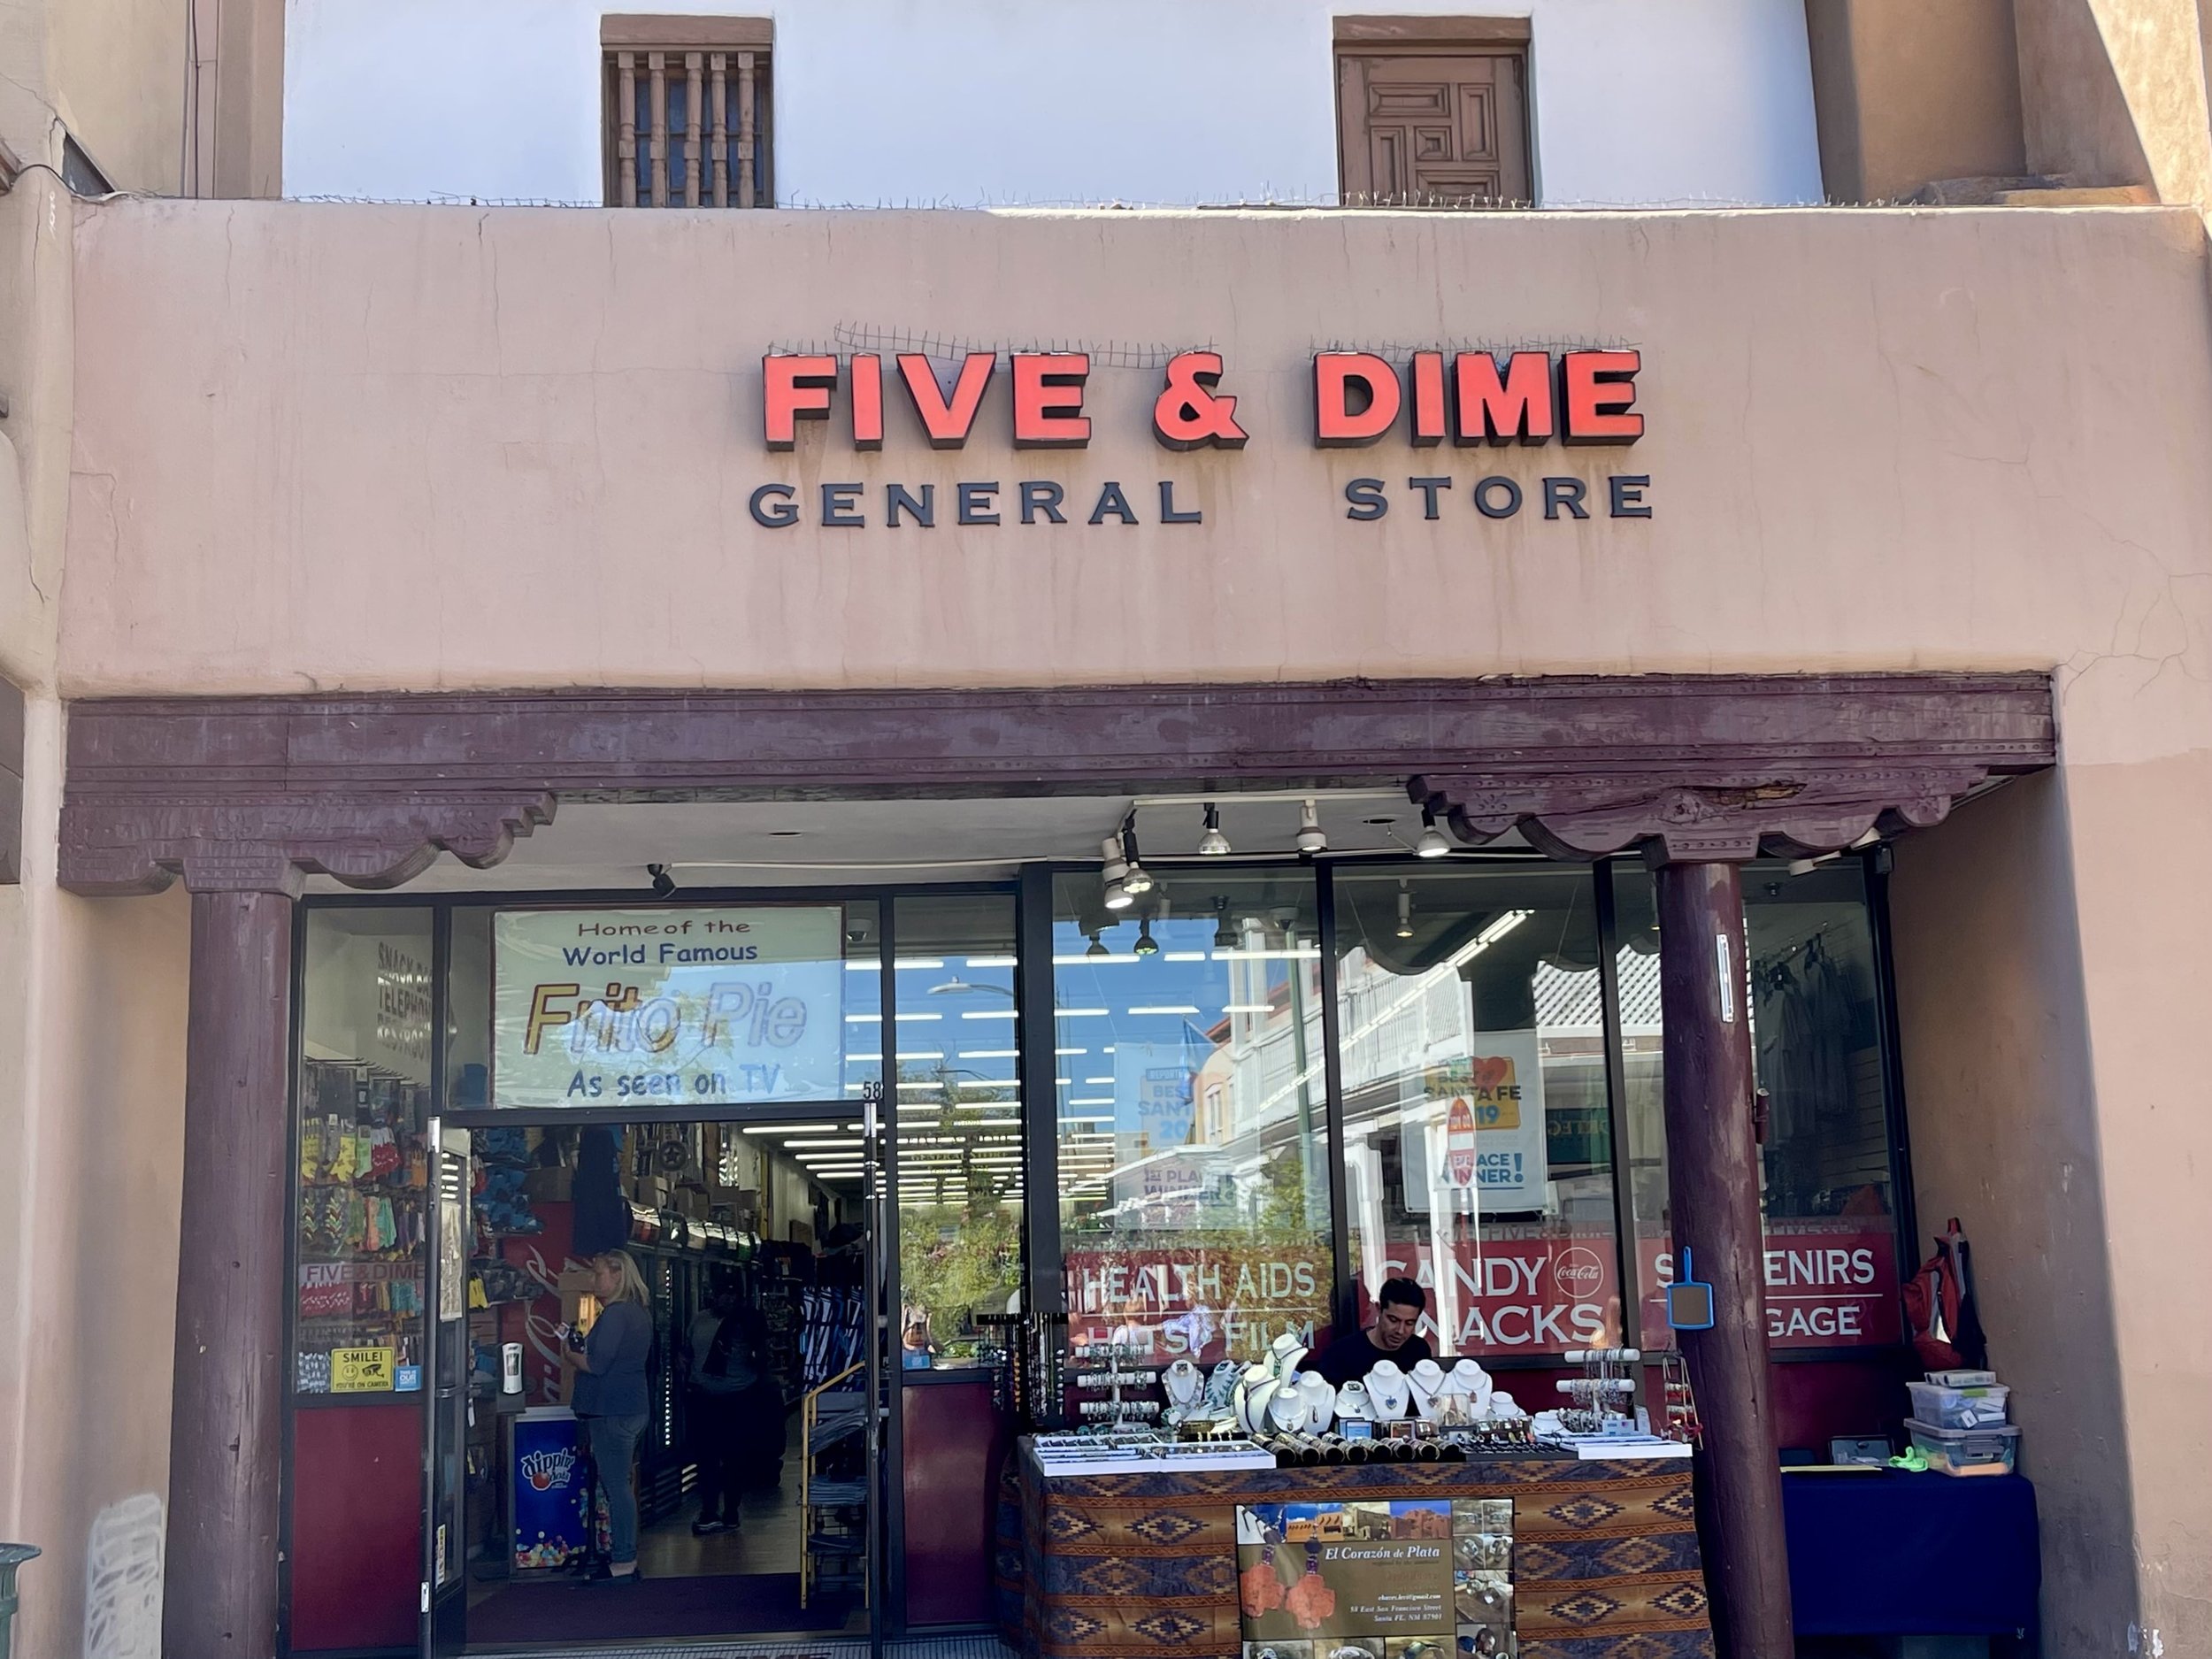 The Five and Dime still serves the original Frito Pie that was invented at this location in Santa Fe.